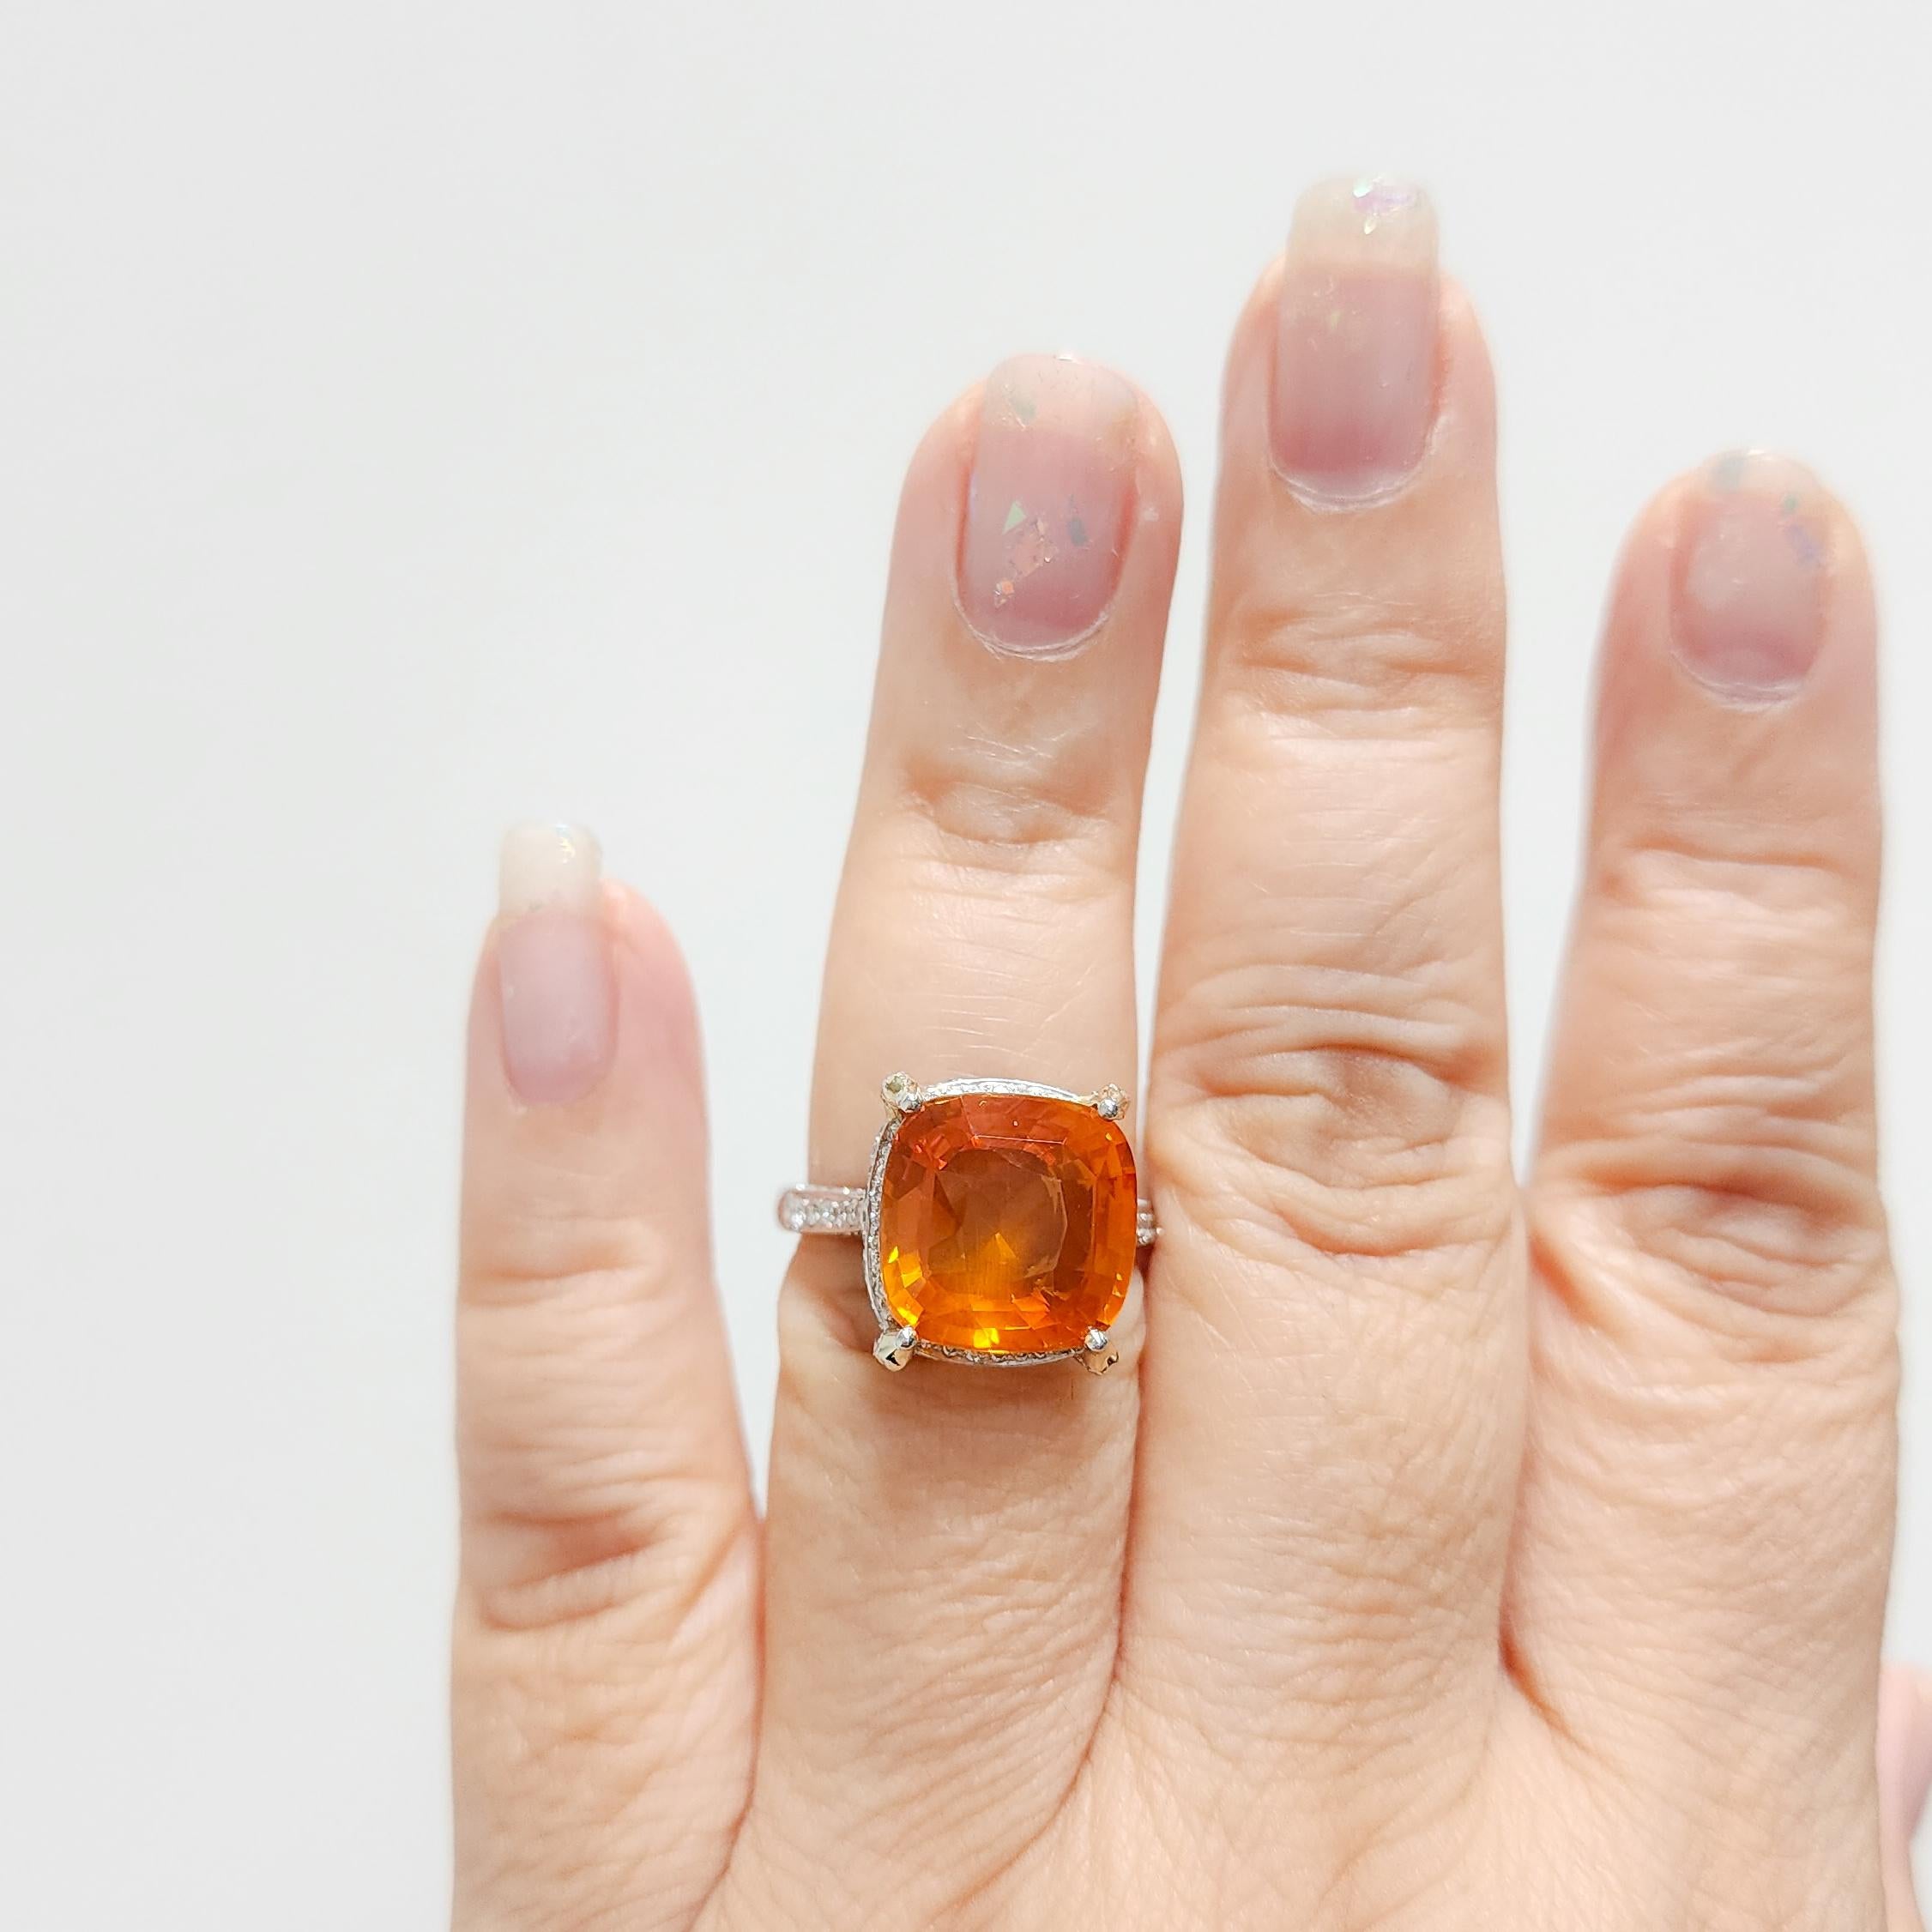 Stunning bright orange 10.29 ct. sapphire cushion with good quality white diamond rounds.  Handmade in platinum.  Ring size 6.75.  GIA certificate included.